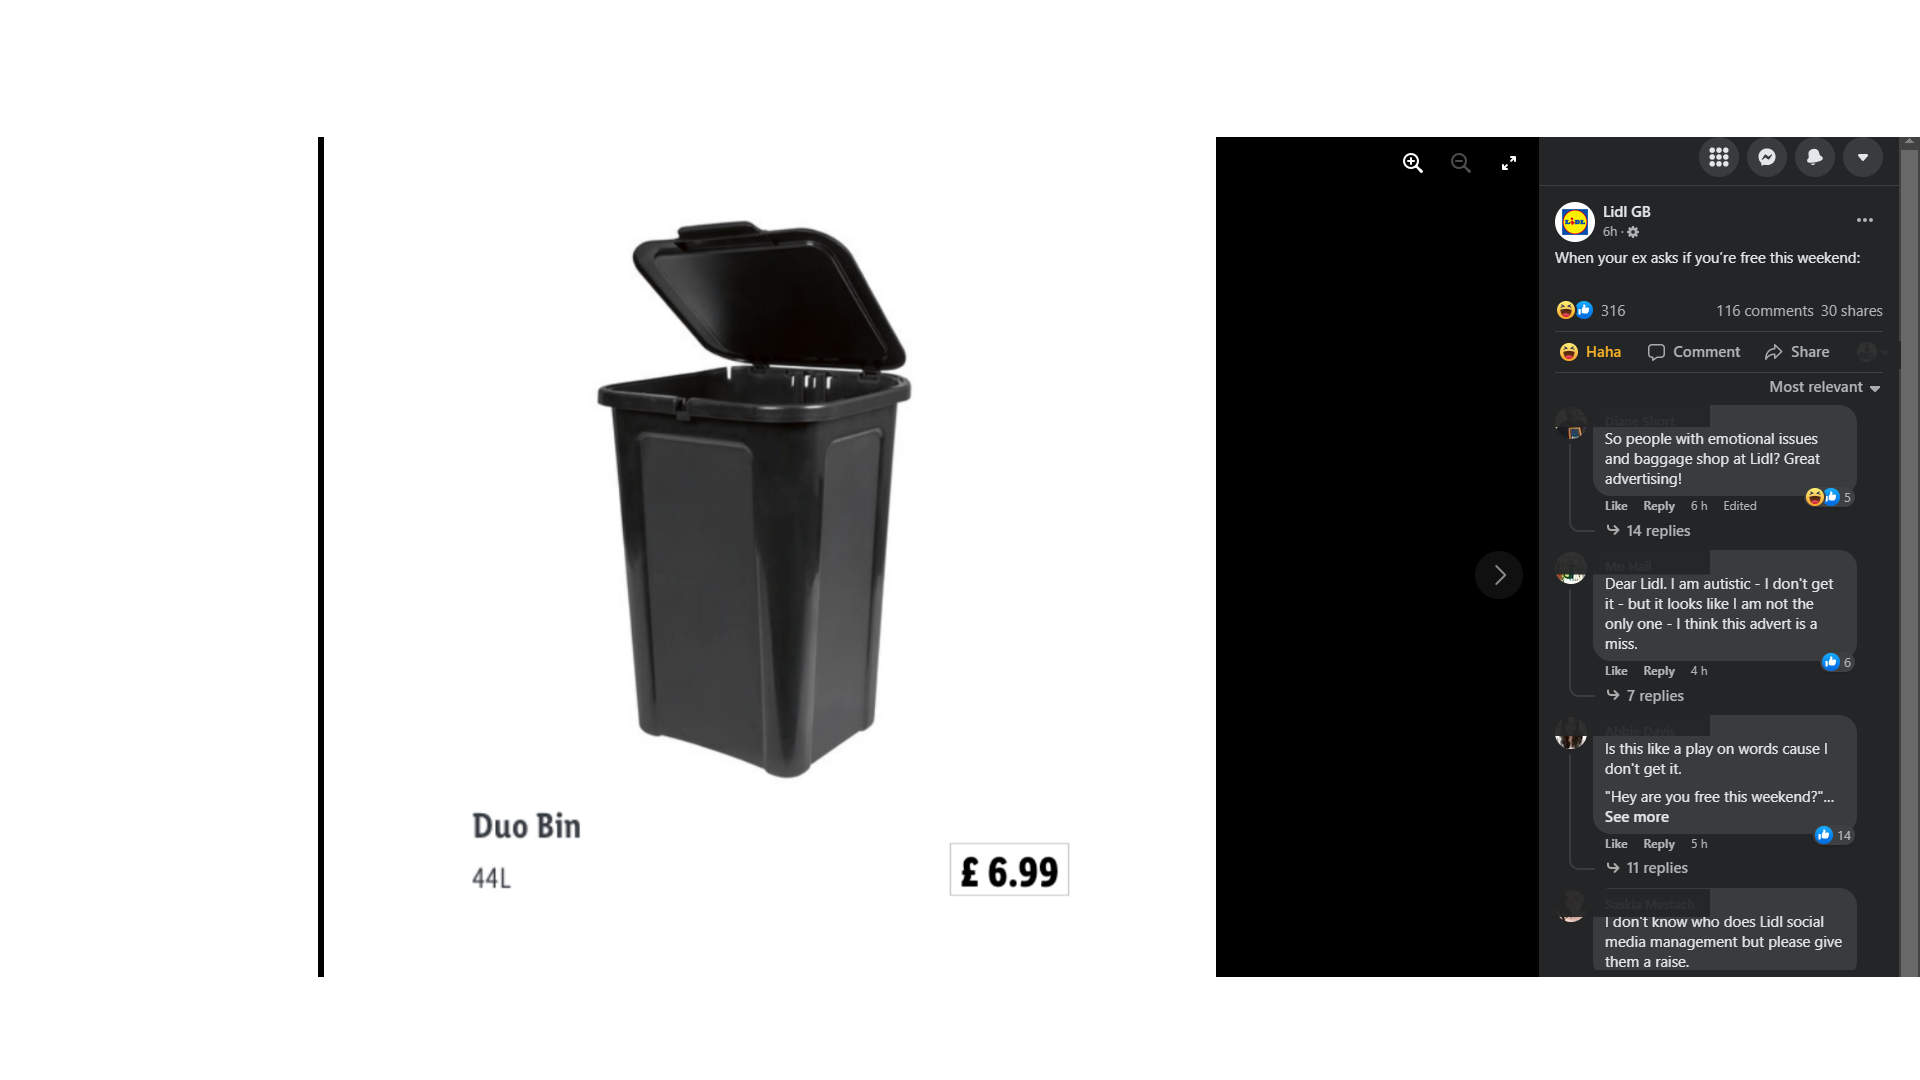 Lidl-gat-a-duo-bin-for-ex-asking-for-weekend-date-from-ex